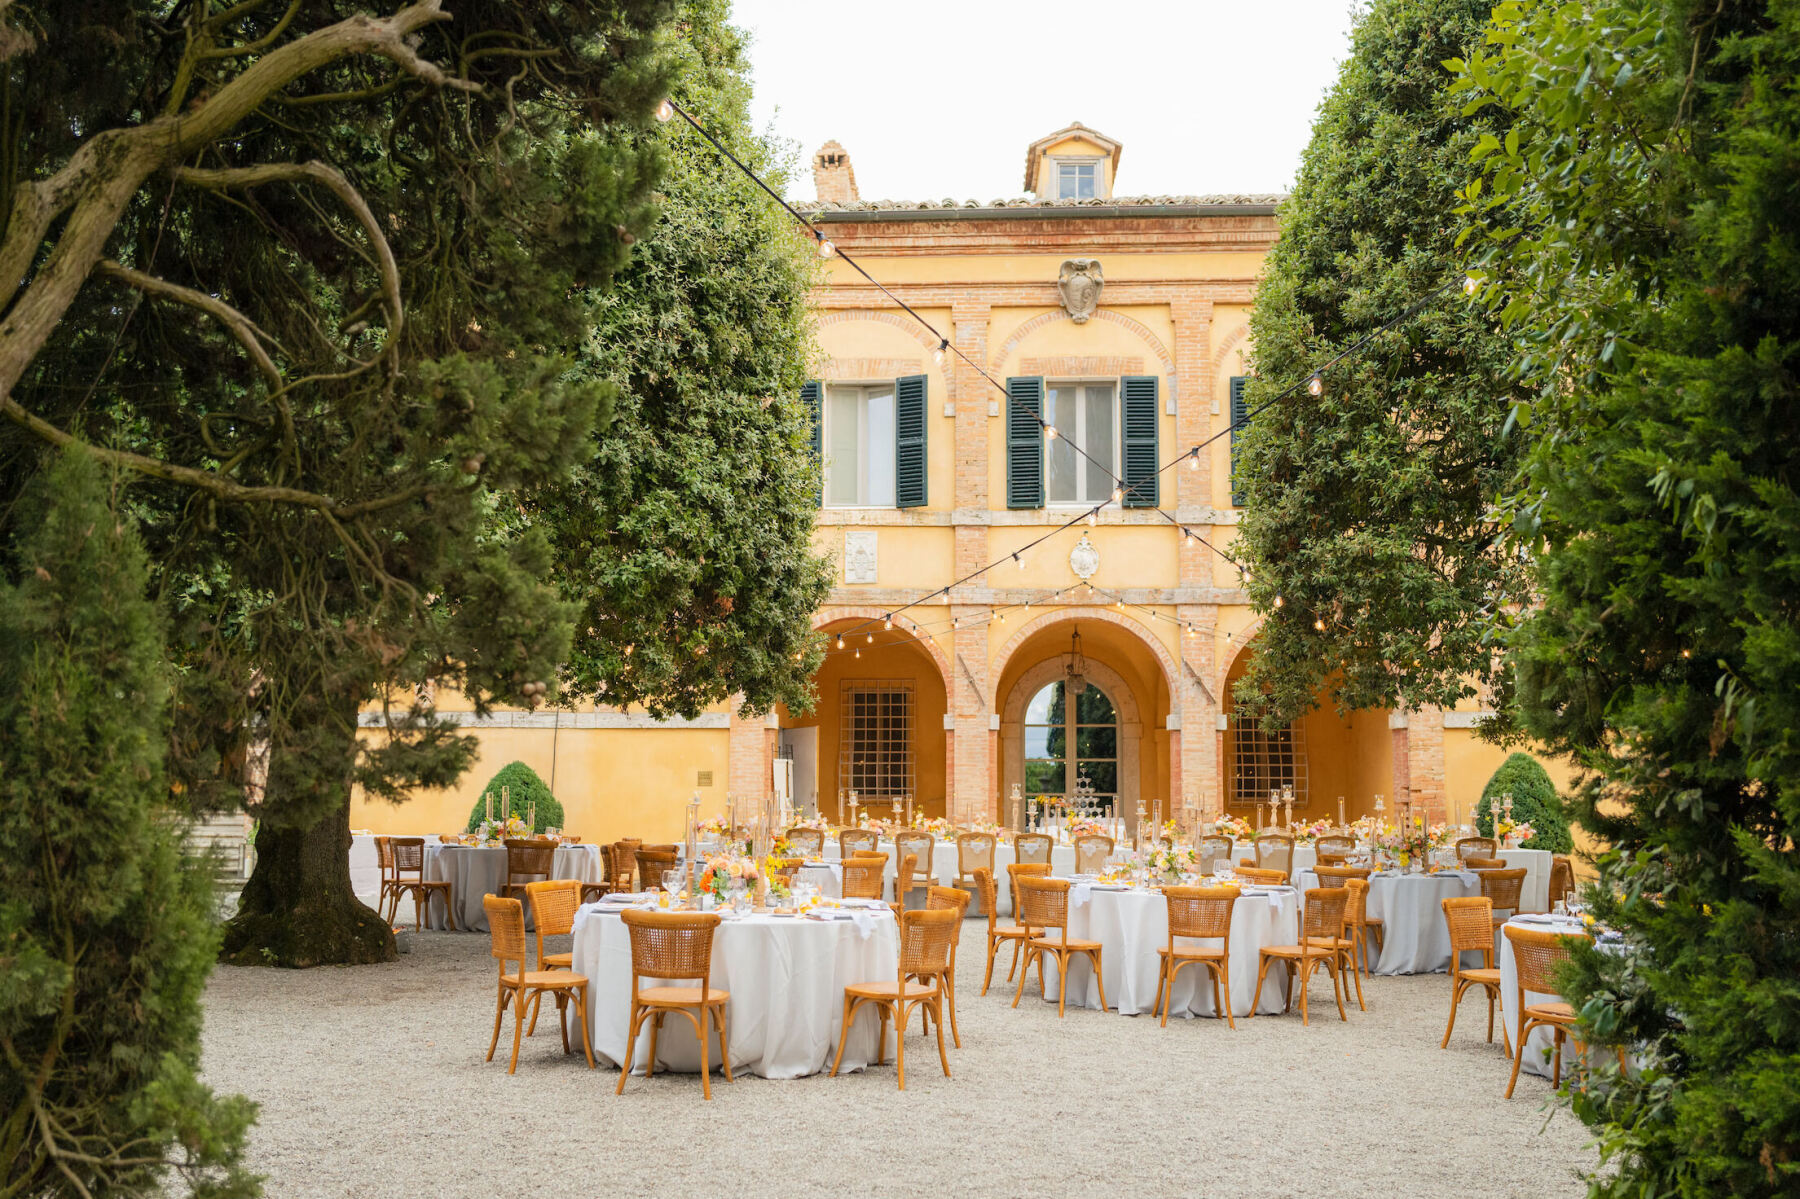 An outdoor reception for a Tuscan wedding where tables were set in the courtyard with bistro lights strung overhead.